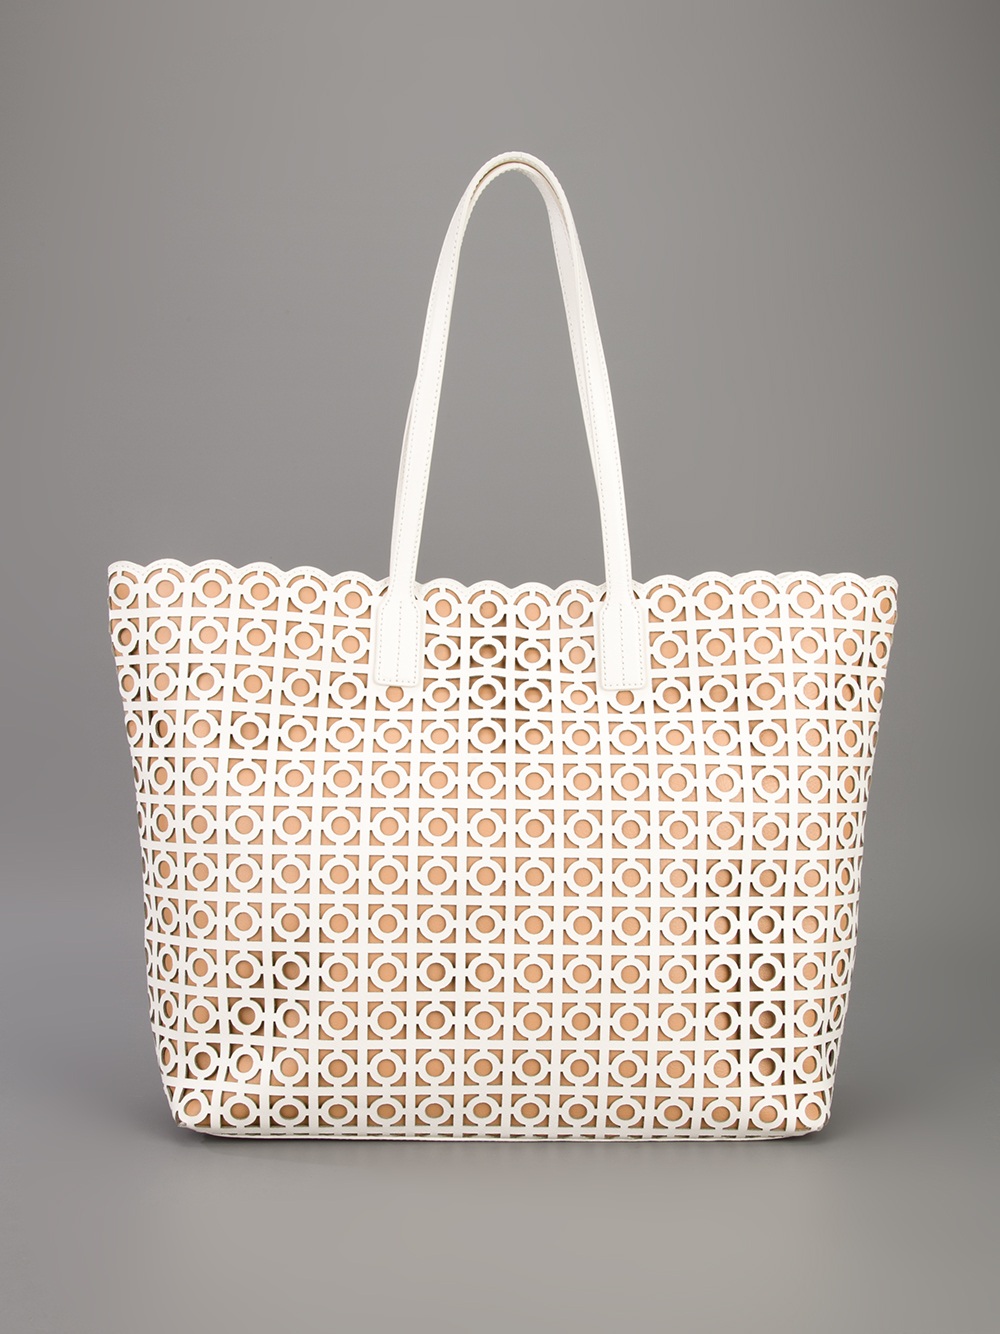 Tory Burch Tote Bag in White - Lyst